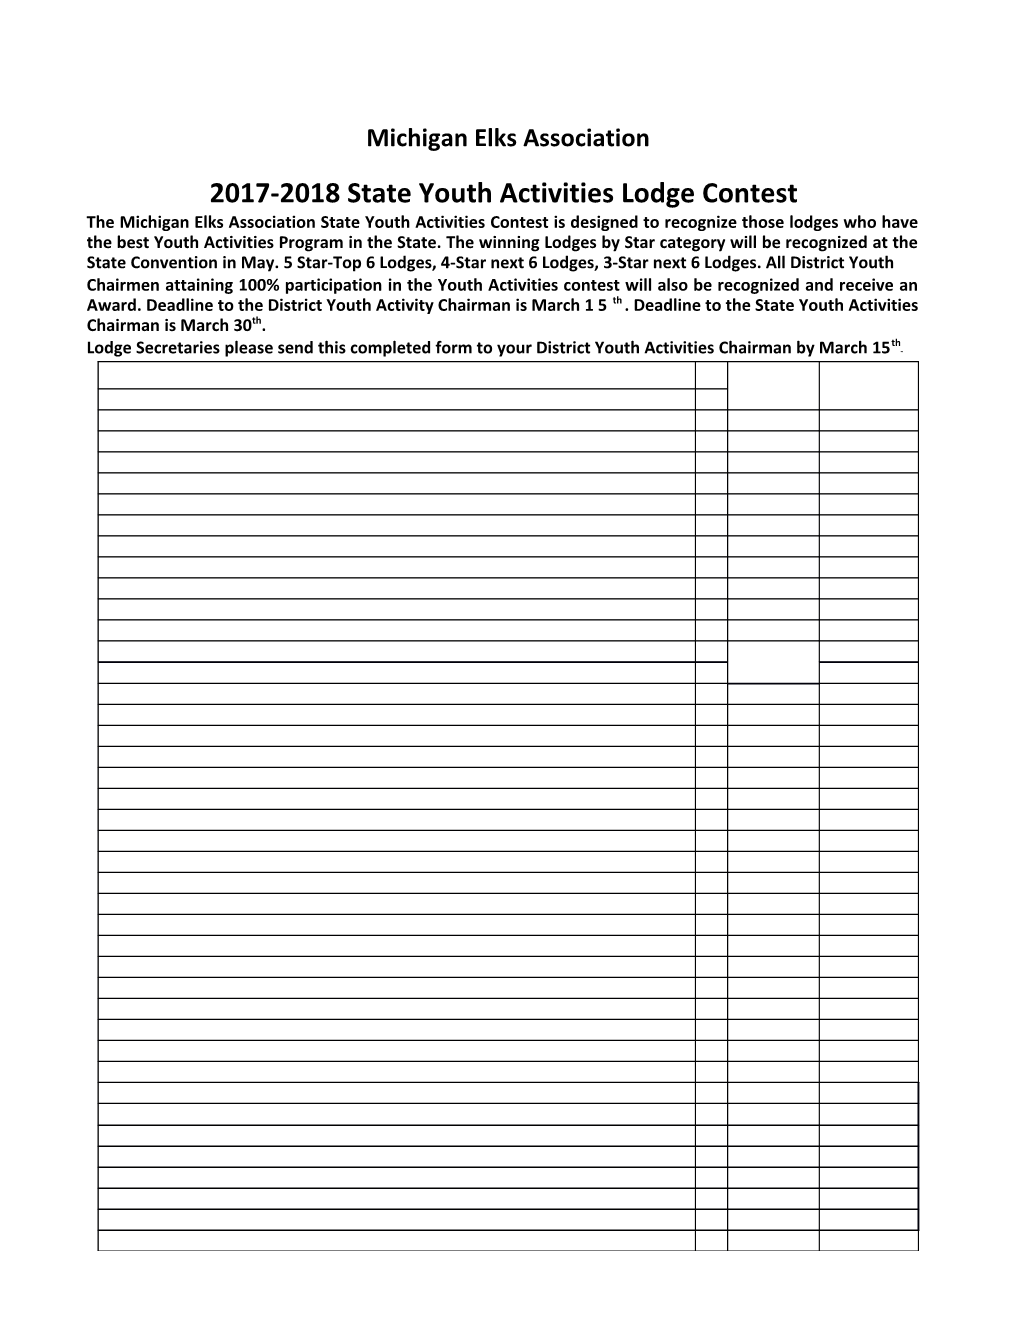 2017-2018 State Youth Activities Lodge Contest